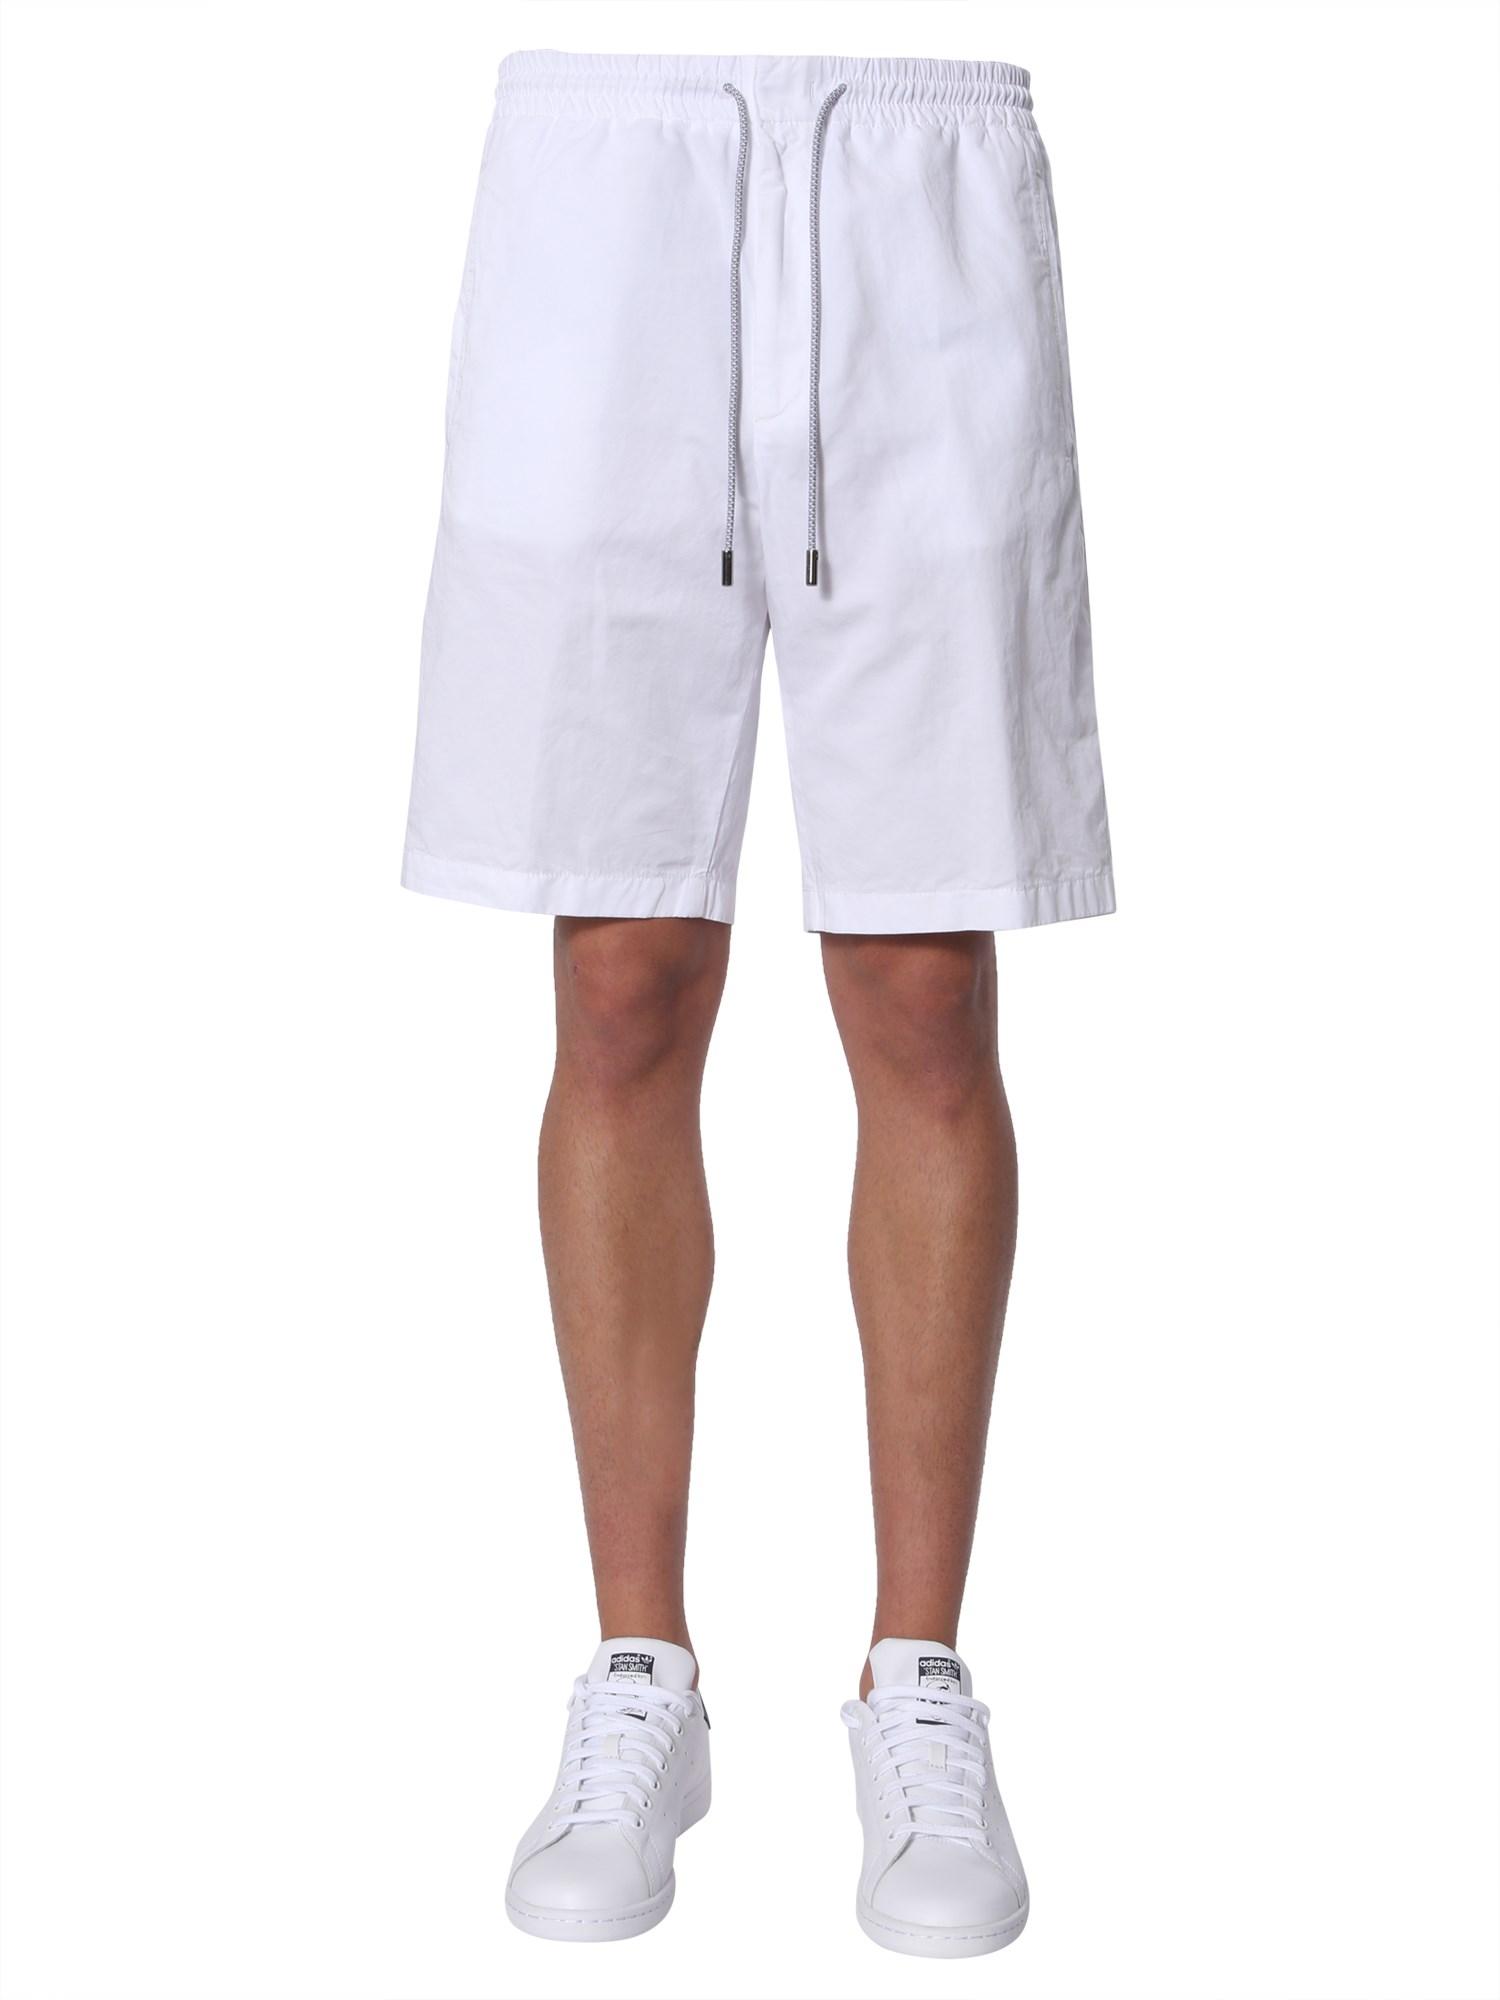 Z Zegna Cotton And Linen-blend Shorts in White for Men - Save 23% - Lyst